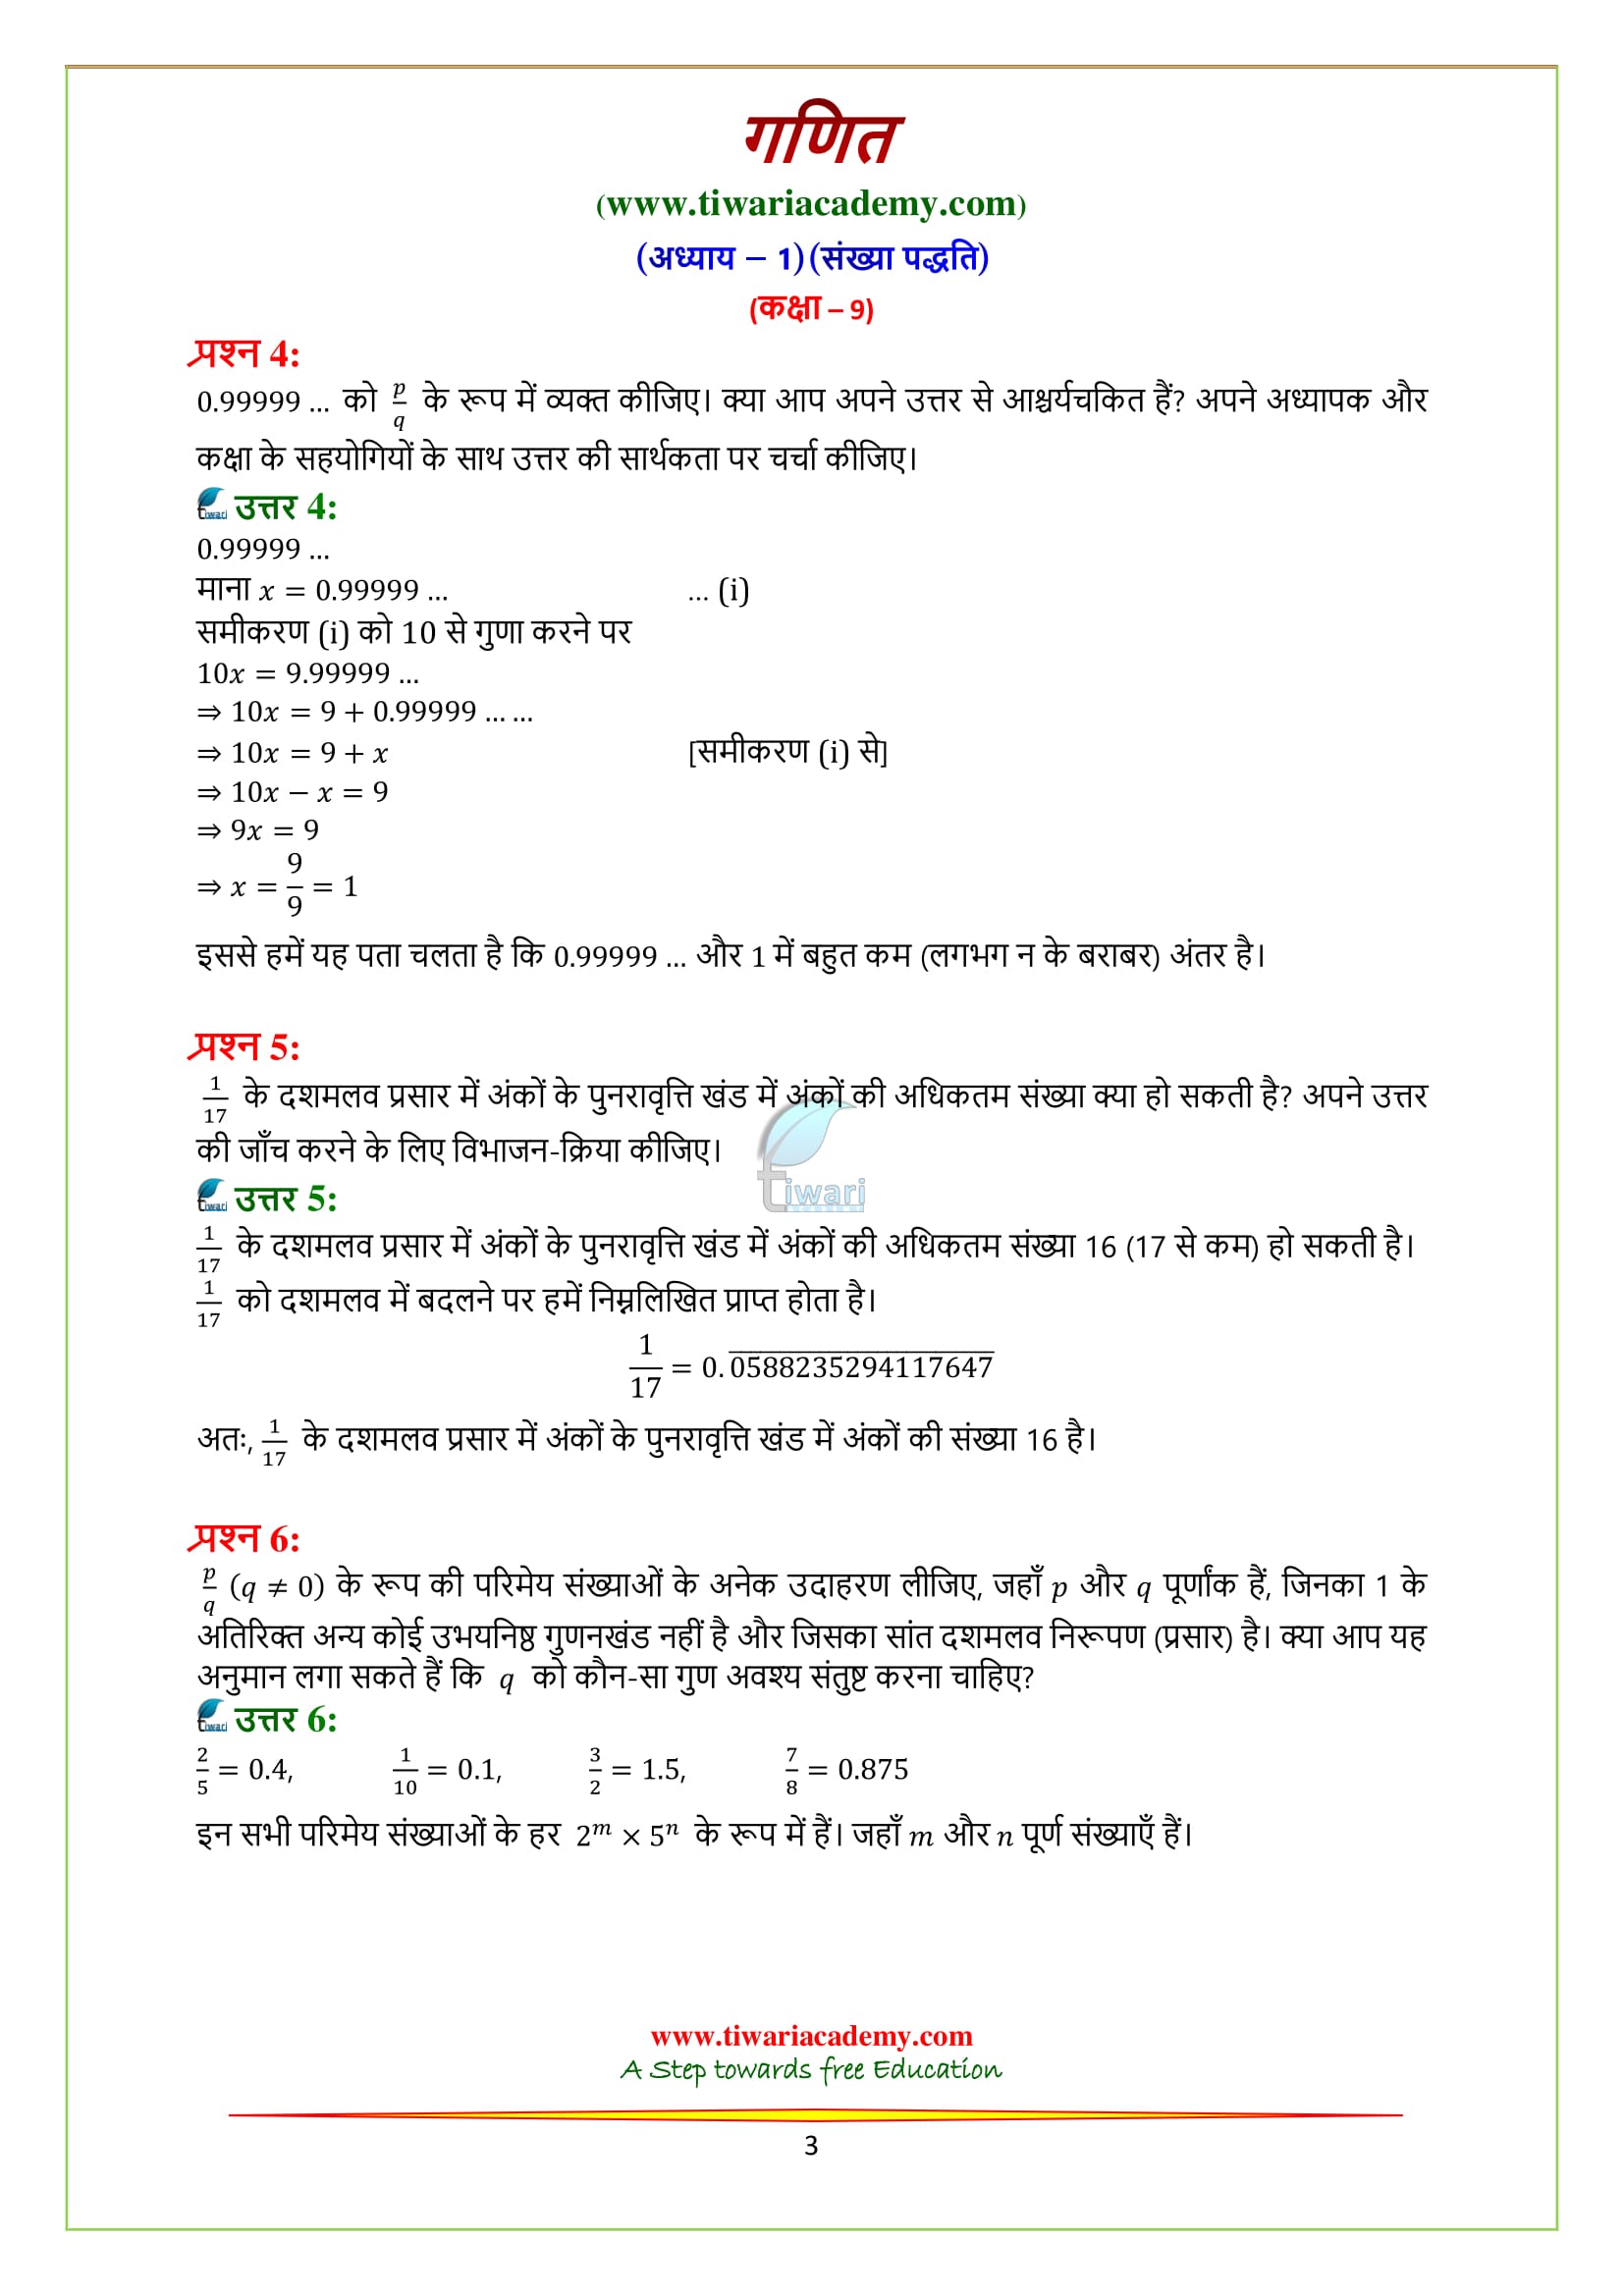 NCERT Solutions for Class 9 Chapter 1 Exercise 1.3 in Hindi PDF